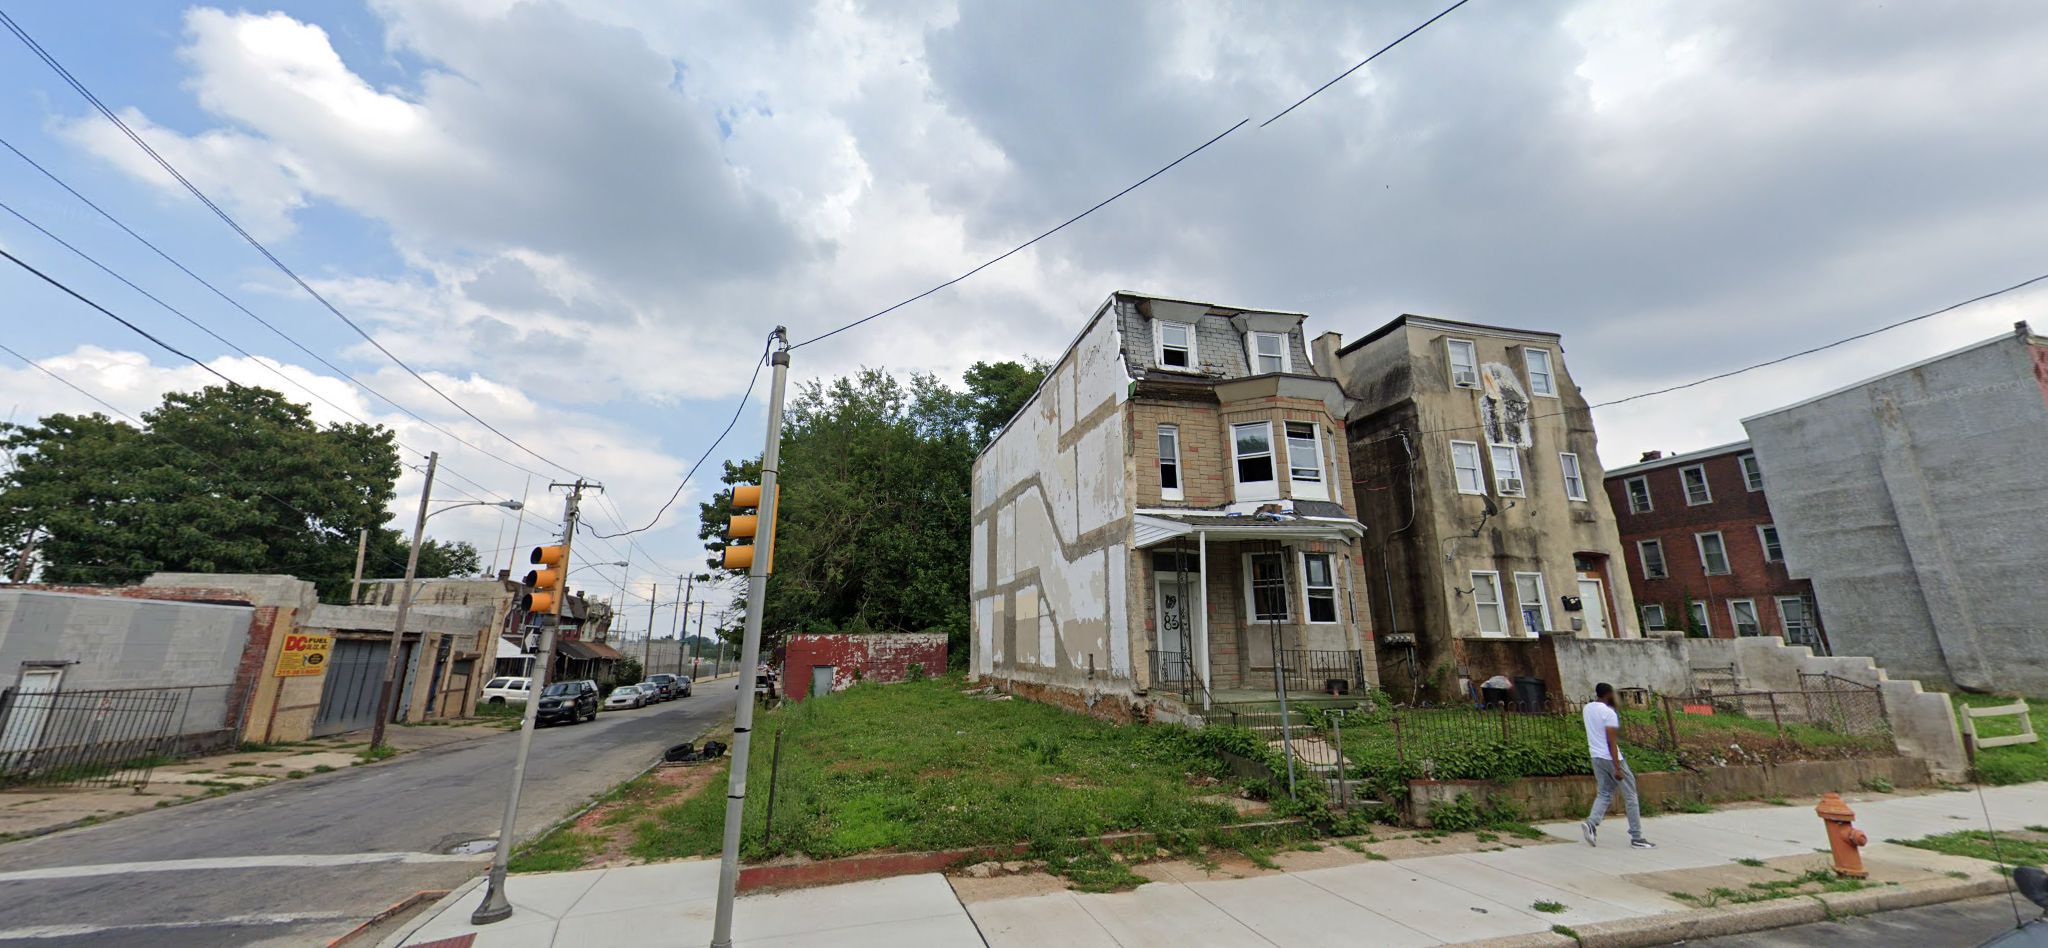 Current view of of 833 North 40th Street. Credit: Google.